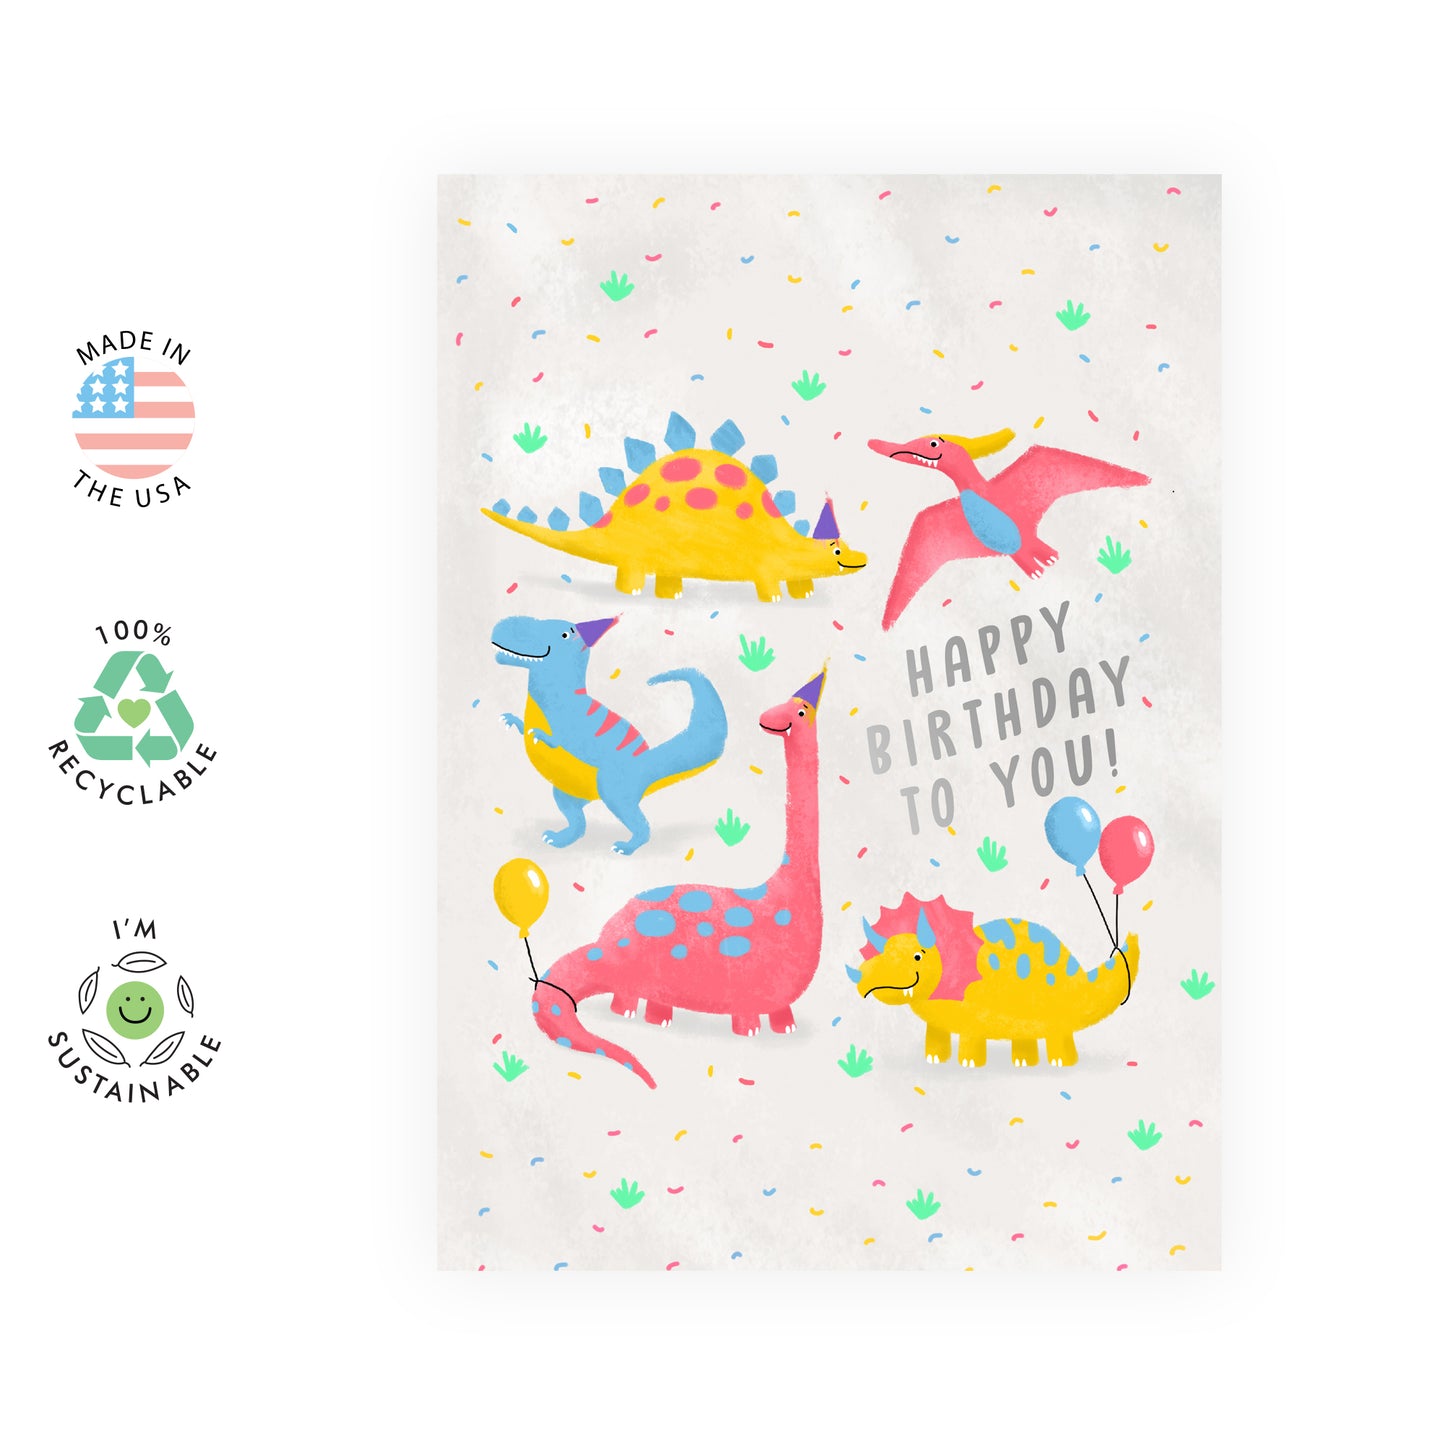 Cute Birthday Card - Dinosaurs Happy Birthday to You - For Boys Girls Kids Him Her